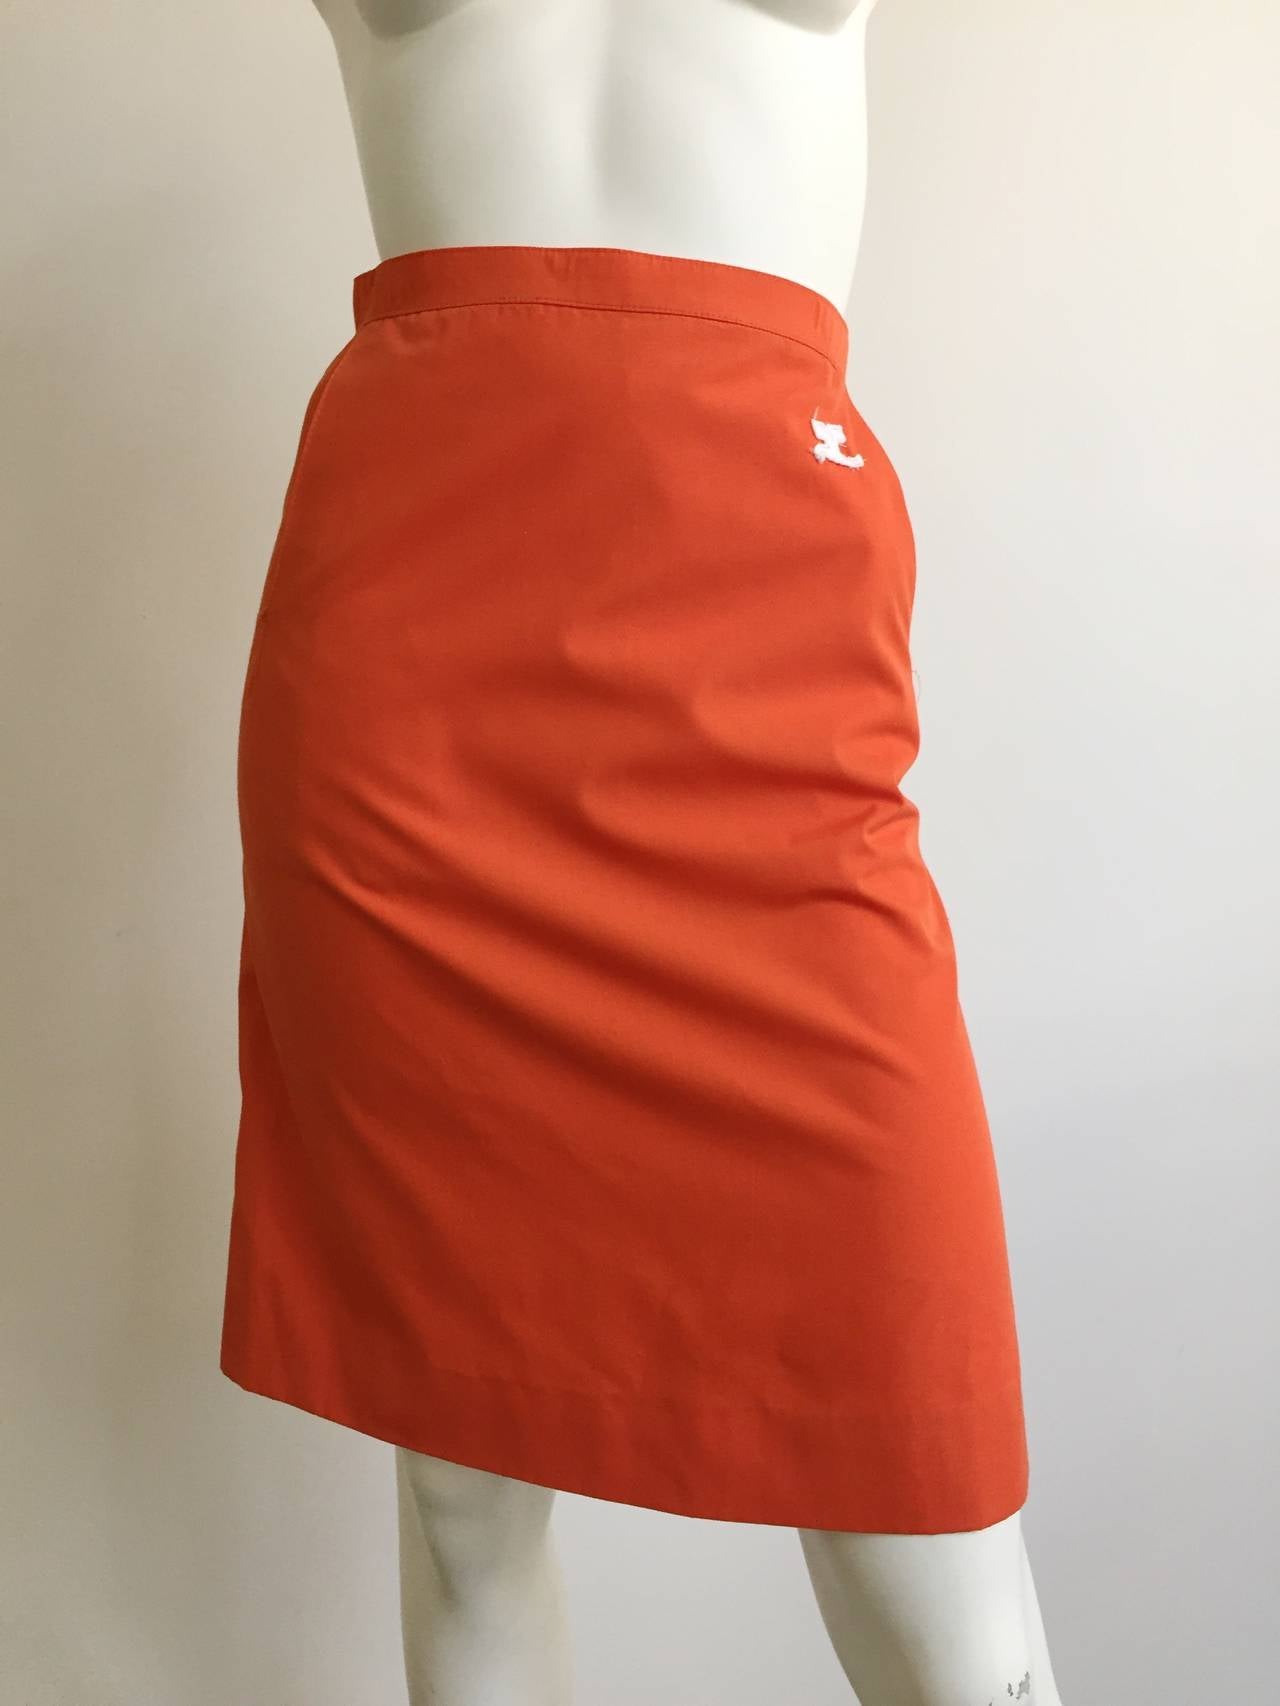 Courreges Paris 1980s orange cotton skirt with pockets made in France and fits a size 4 ( Please see and use measurements).
This form fitting sexy cotton casual Courreges Paris skirt is perfect for any day time event.
Measurements are:
25